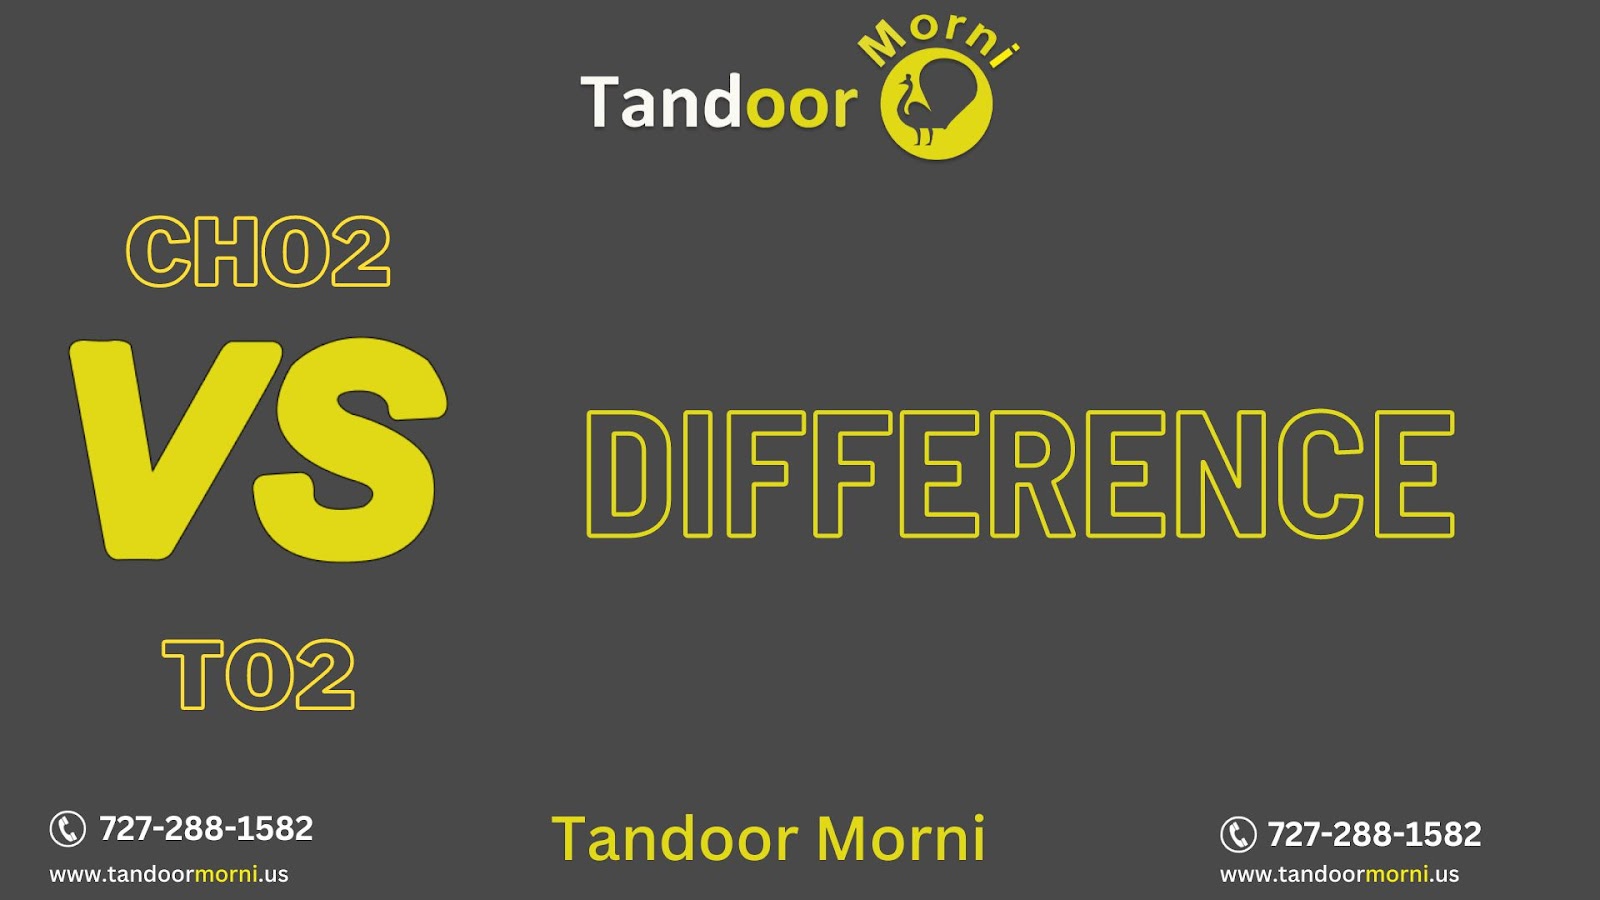 Difference between a CH02 and a T02 tandoor